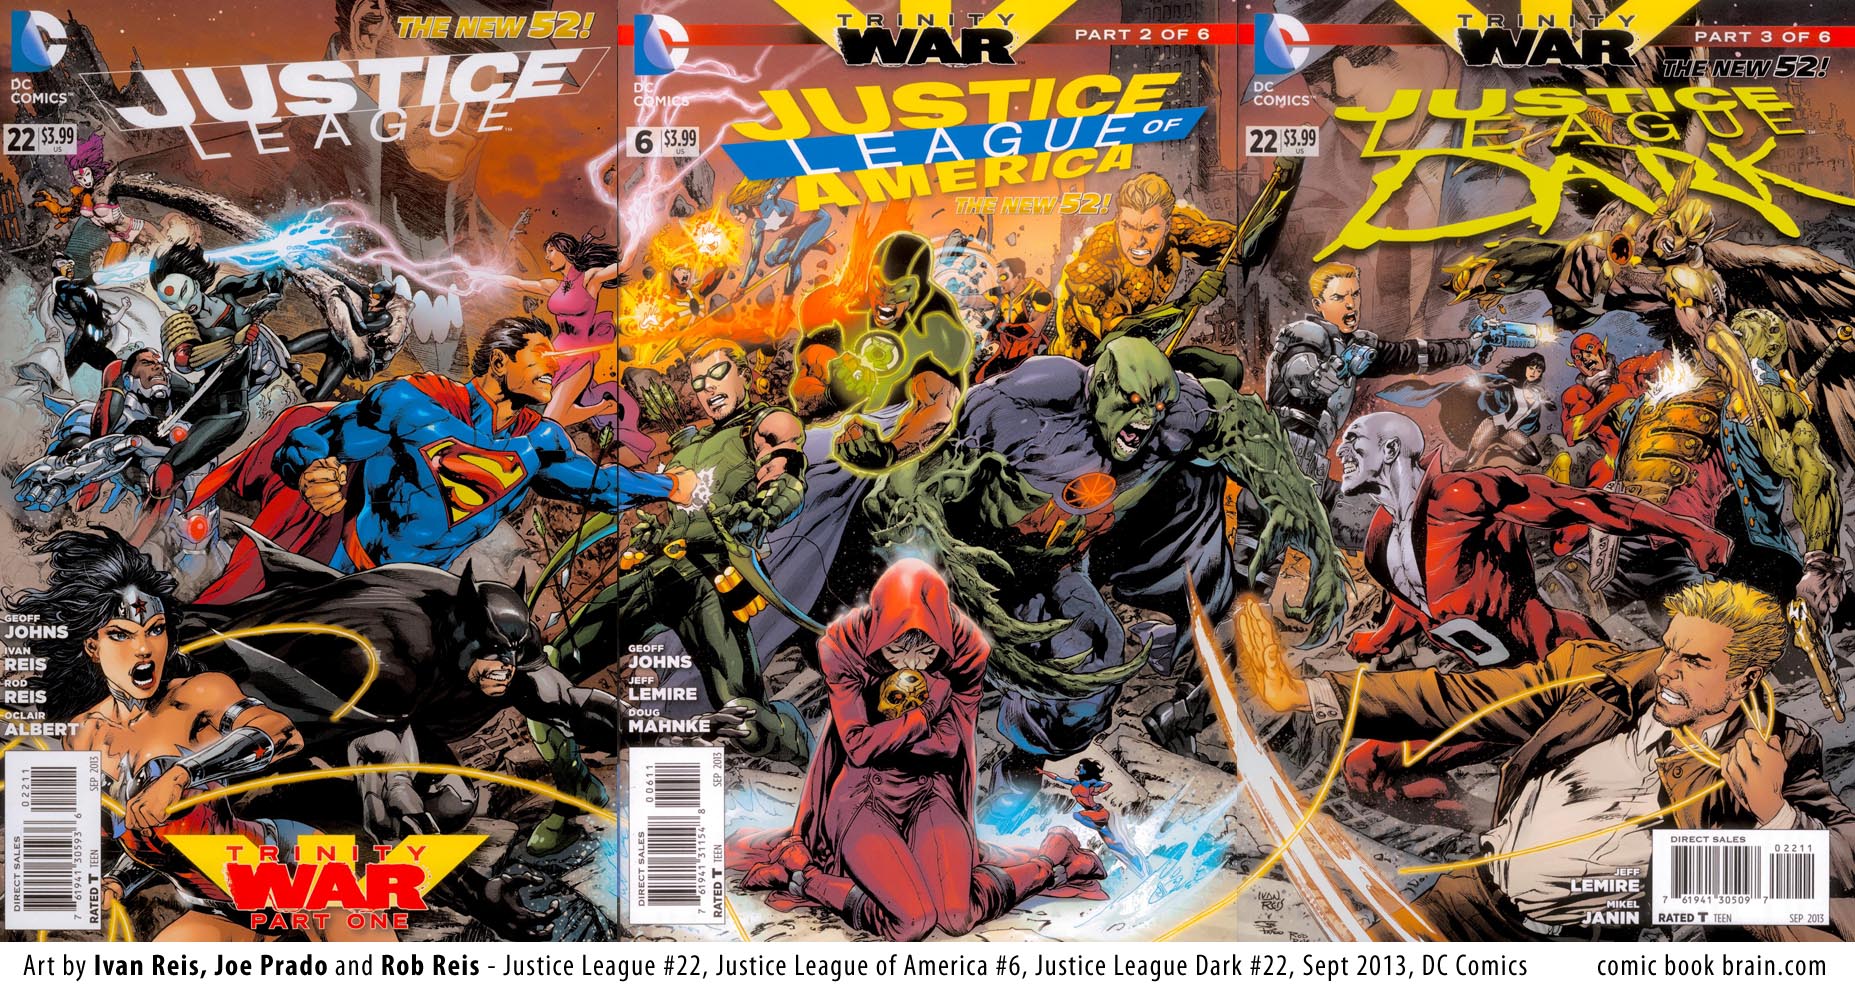 Justice League Trinity War Review By Deffinition as part of New 52 Graphic Novel Talk